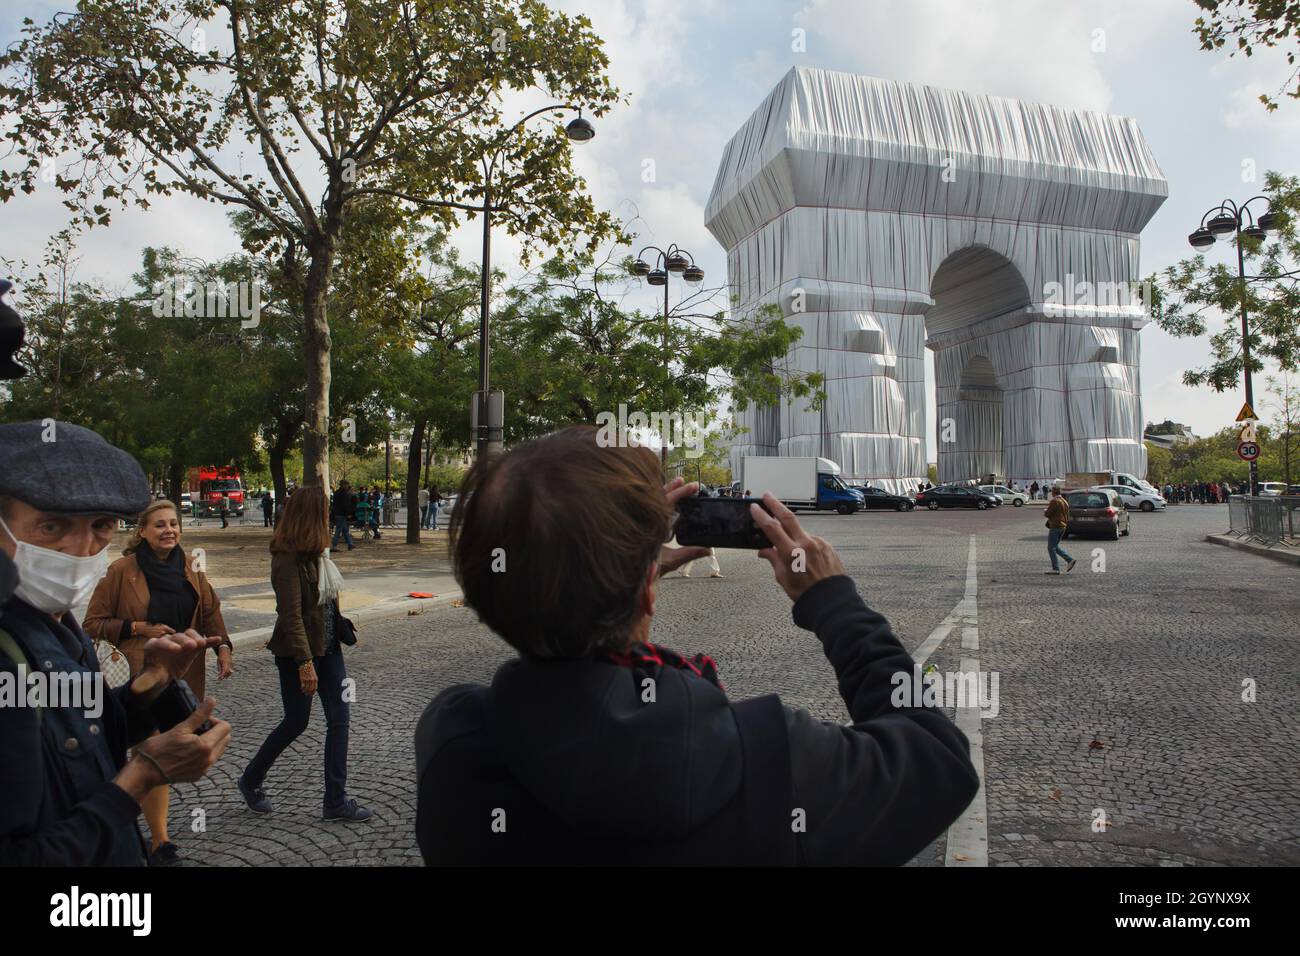 Person uses a smartphone to photograph the Arc de Triomphe wrapped in silver-blue fabric fastened with red ropes in the Place Charles de Gaulle in Paris, France. The Arc de Triomphe was wrapped for two weeks being converted to an artwork as it was designed by Christo and Jeanne-Claude in September 2021. Stock Photo